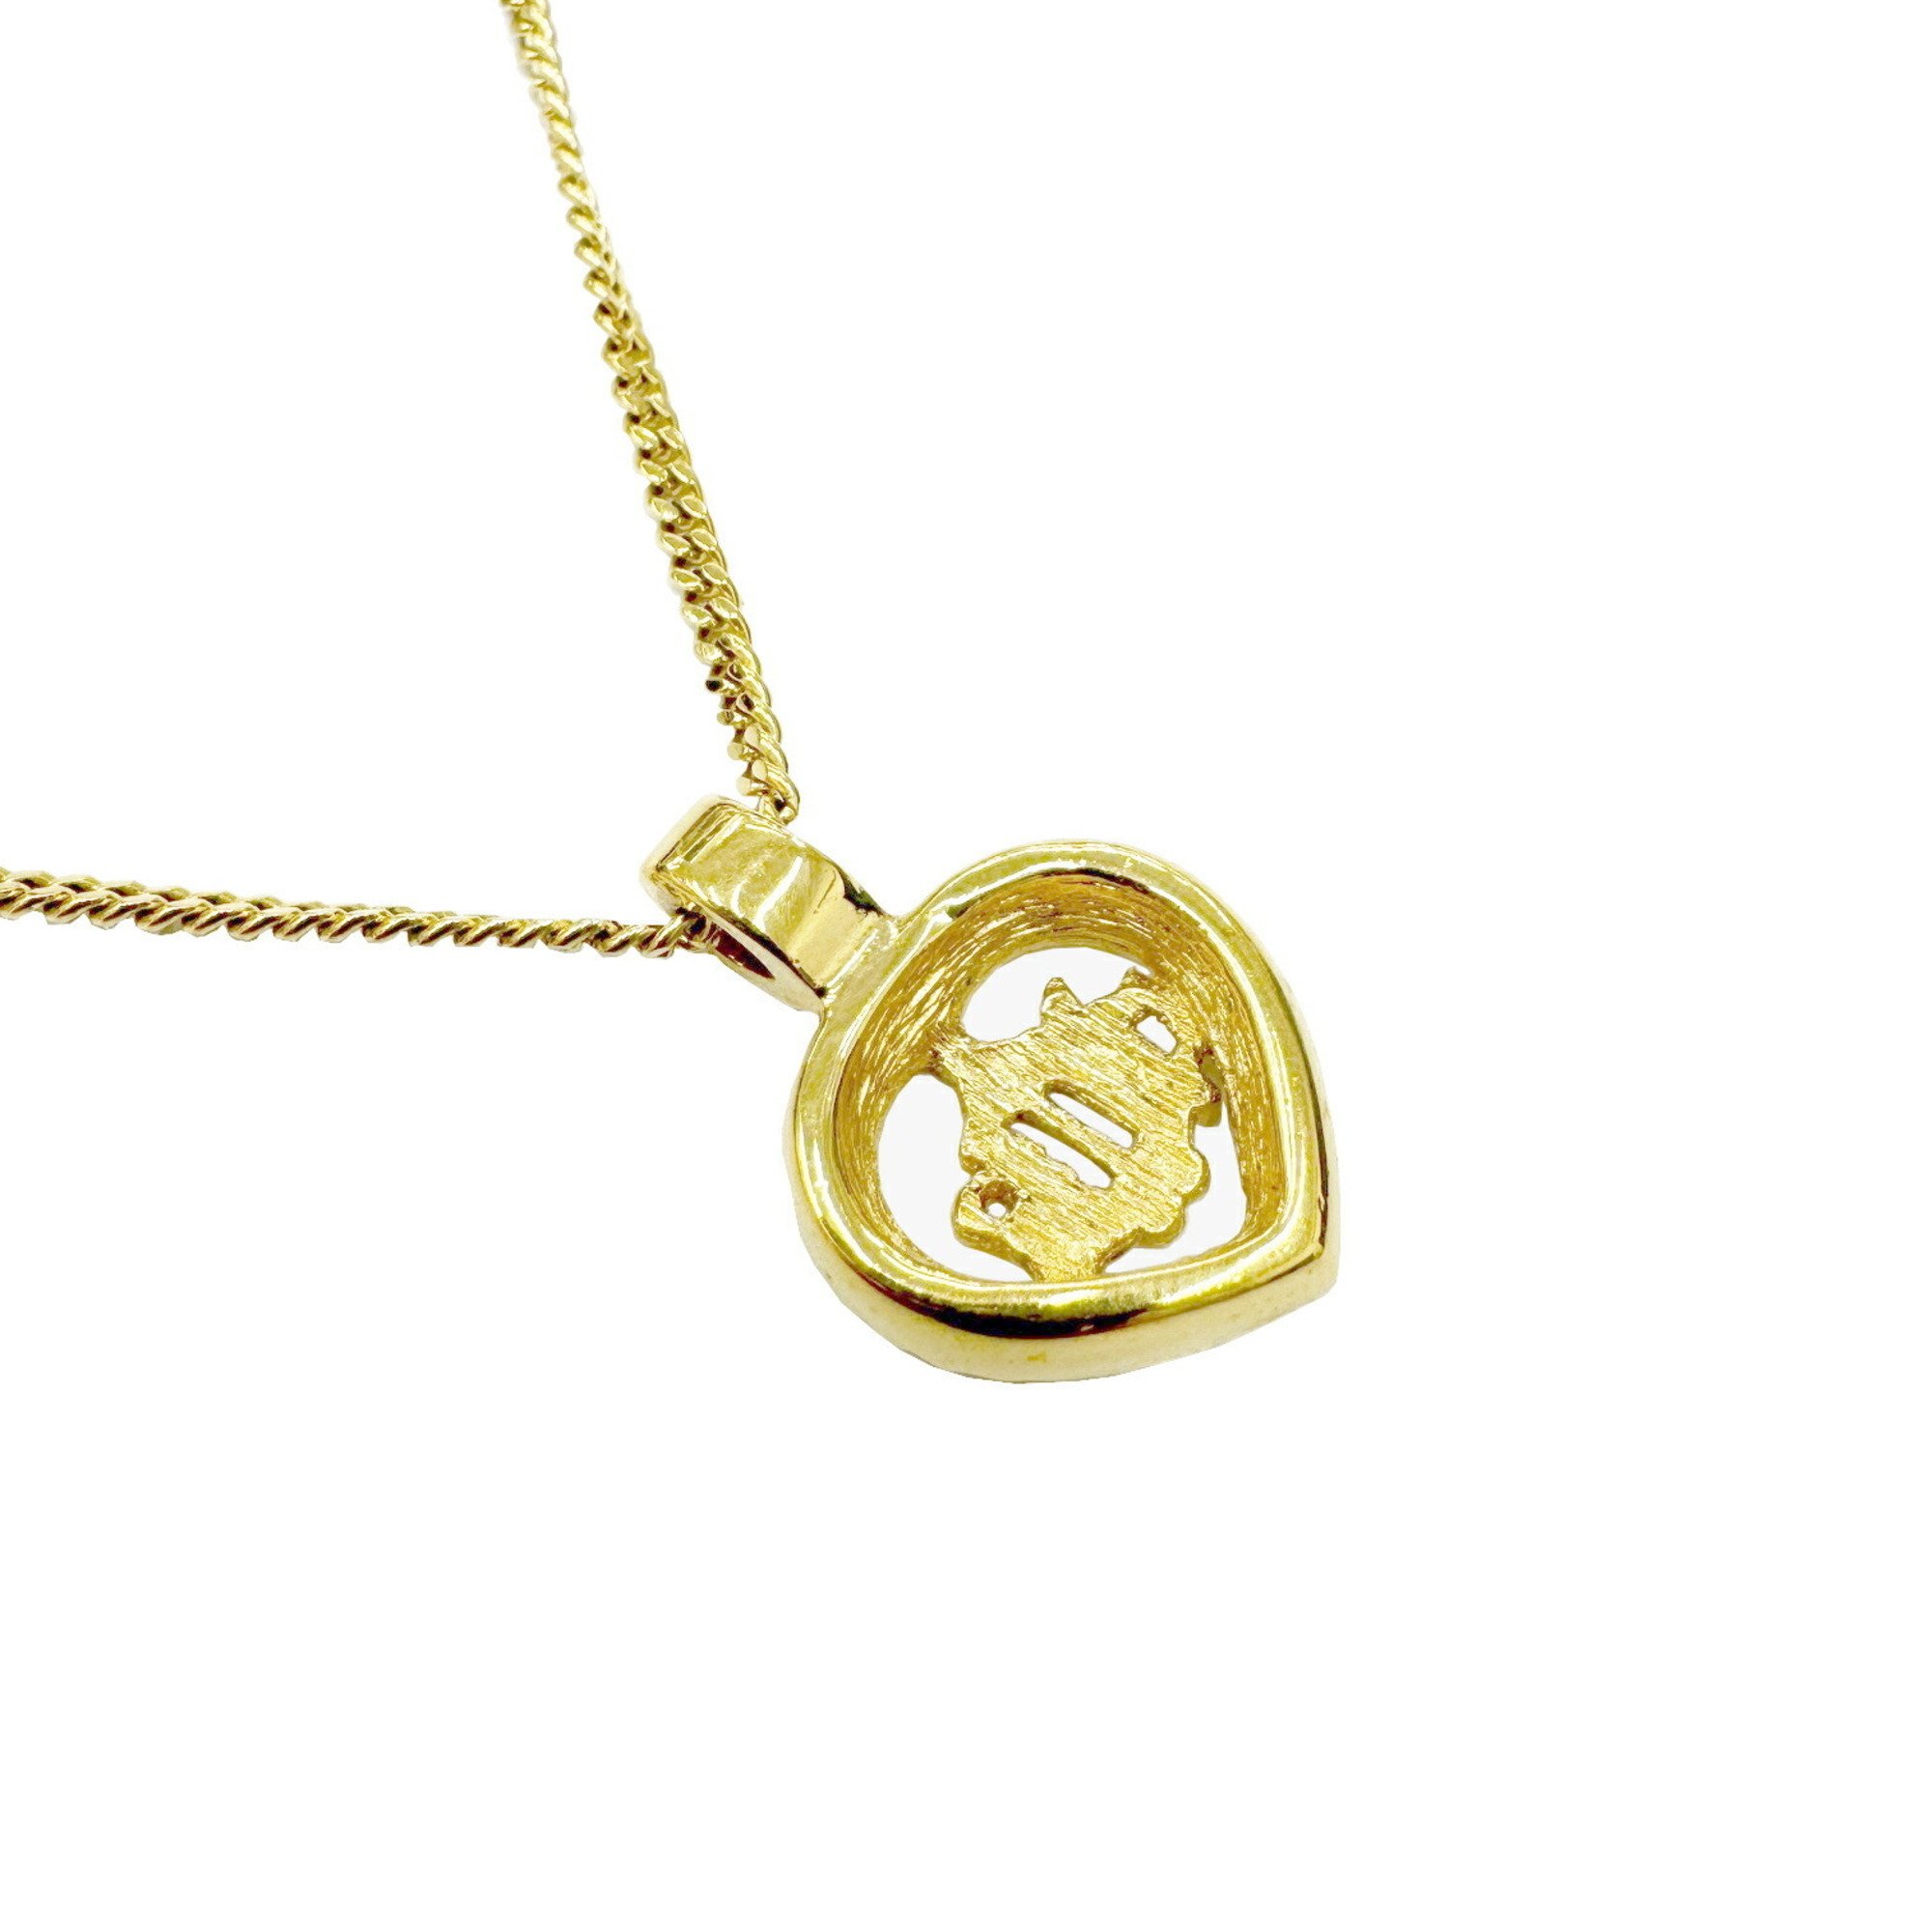 Christian Dior Necklace GP Gold Plated Women's